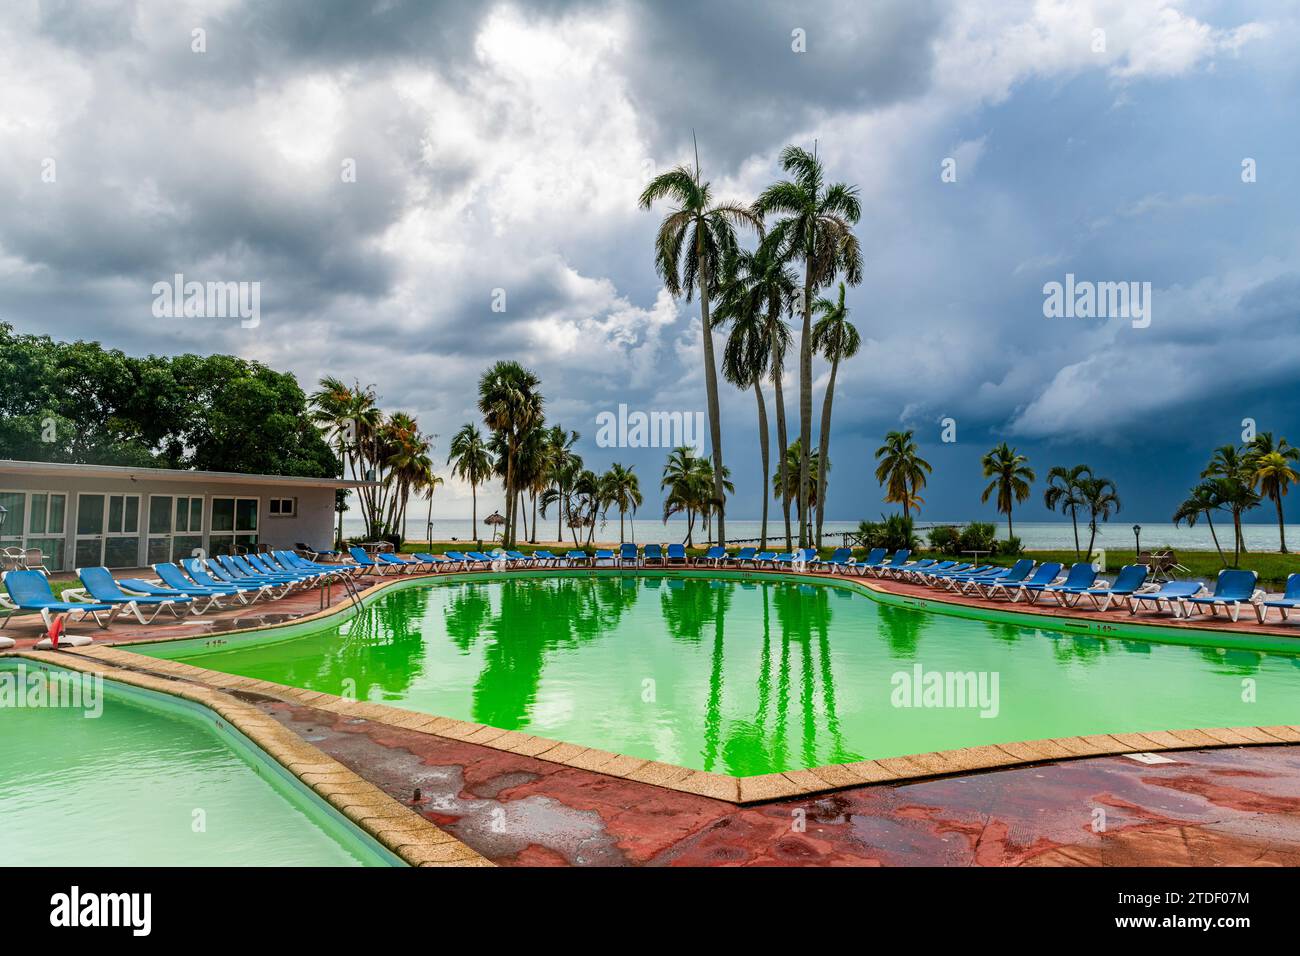 Green pool at a Luxury hotel in Hotel el Colony before a storm, Isla de la Juventud (Isle of Youth), Cuba, West Indies, Central America Stock Photo